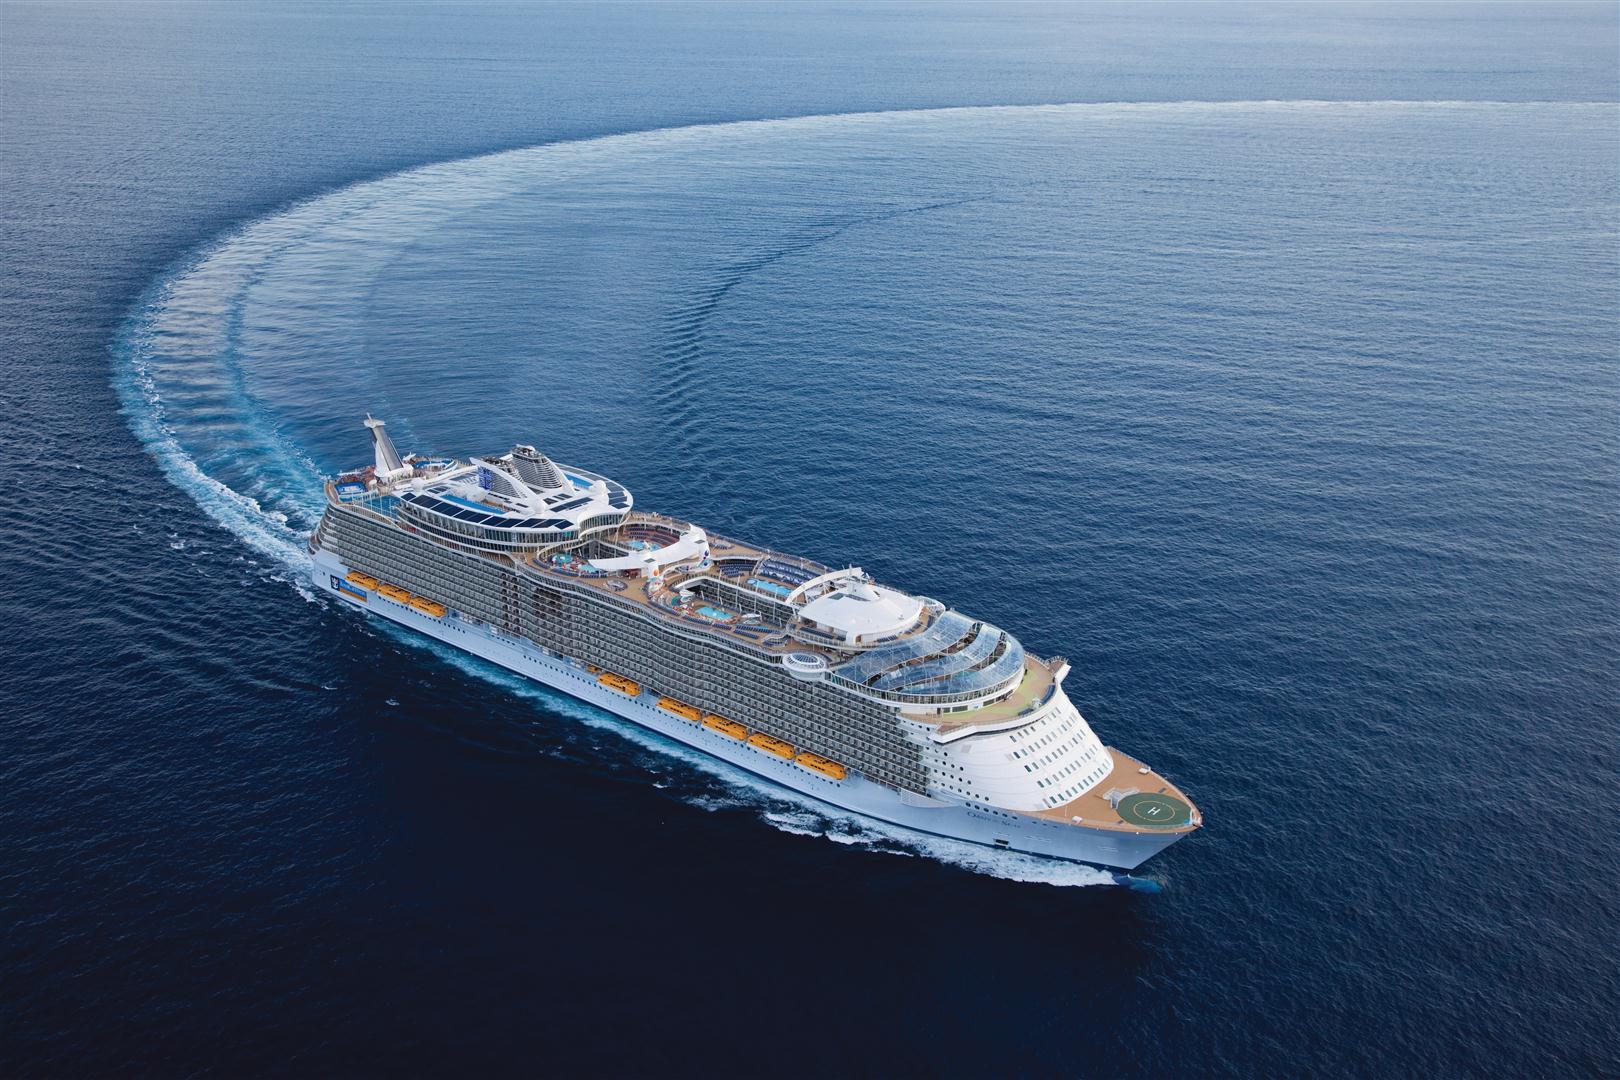 Royal Caribbean gets CDC approval to start test sailings on Oasis of the Seas | Royal Caribbean Blog